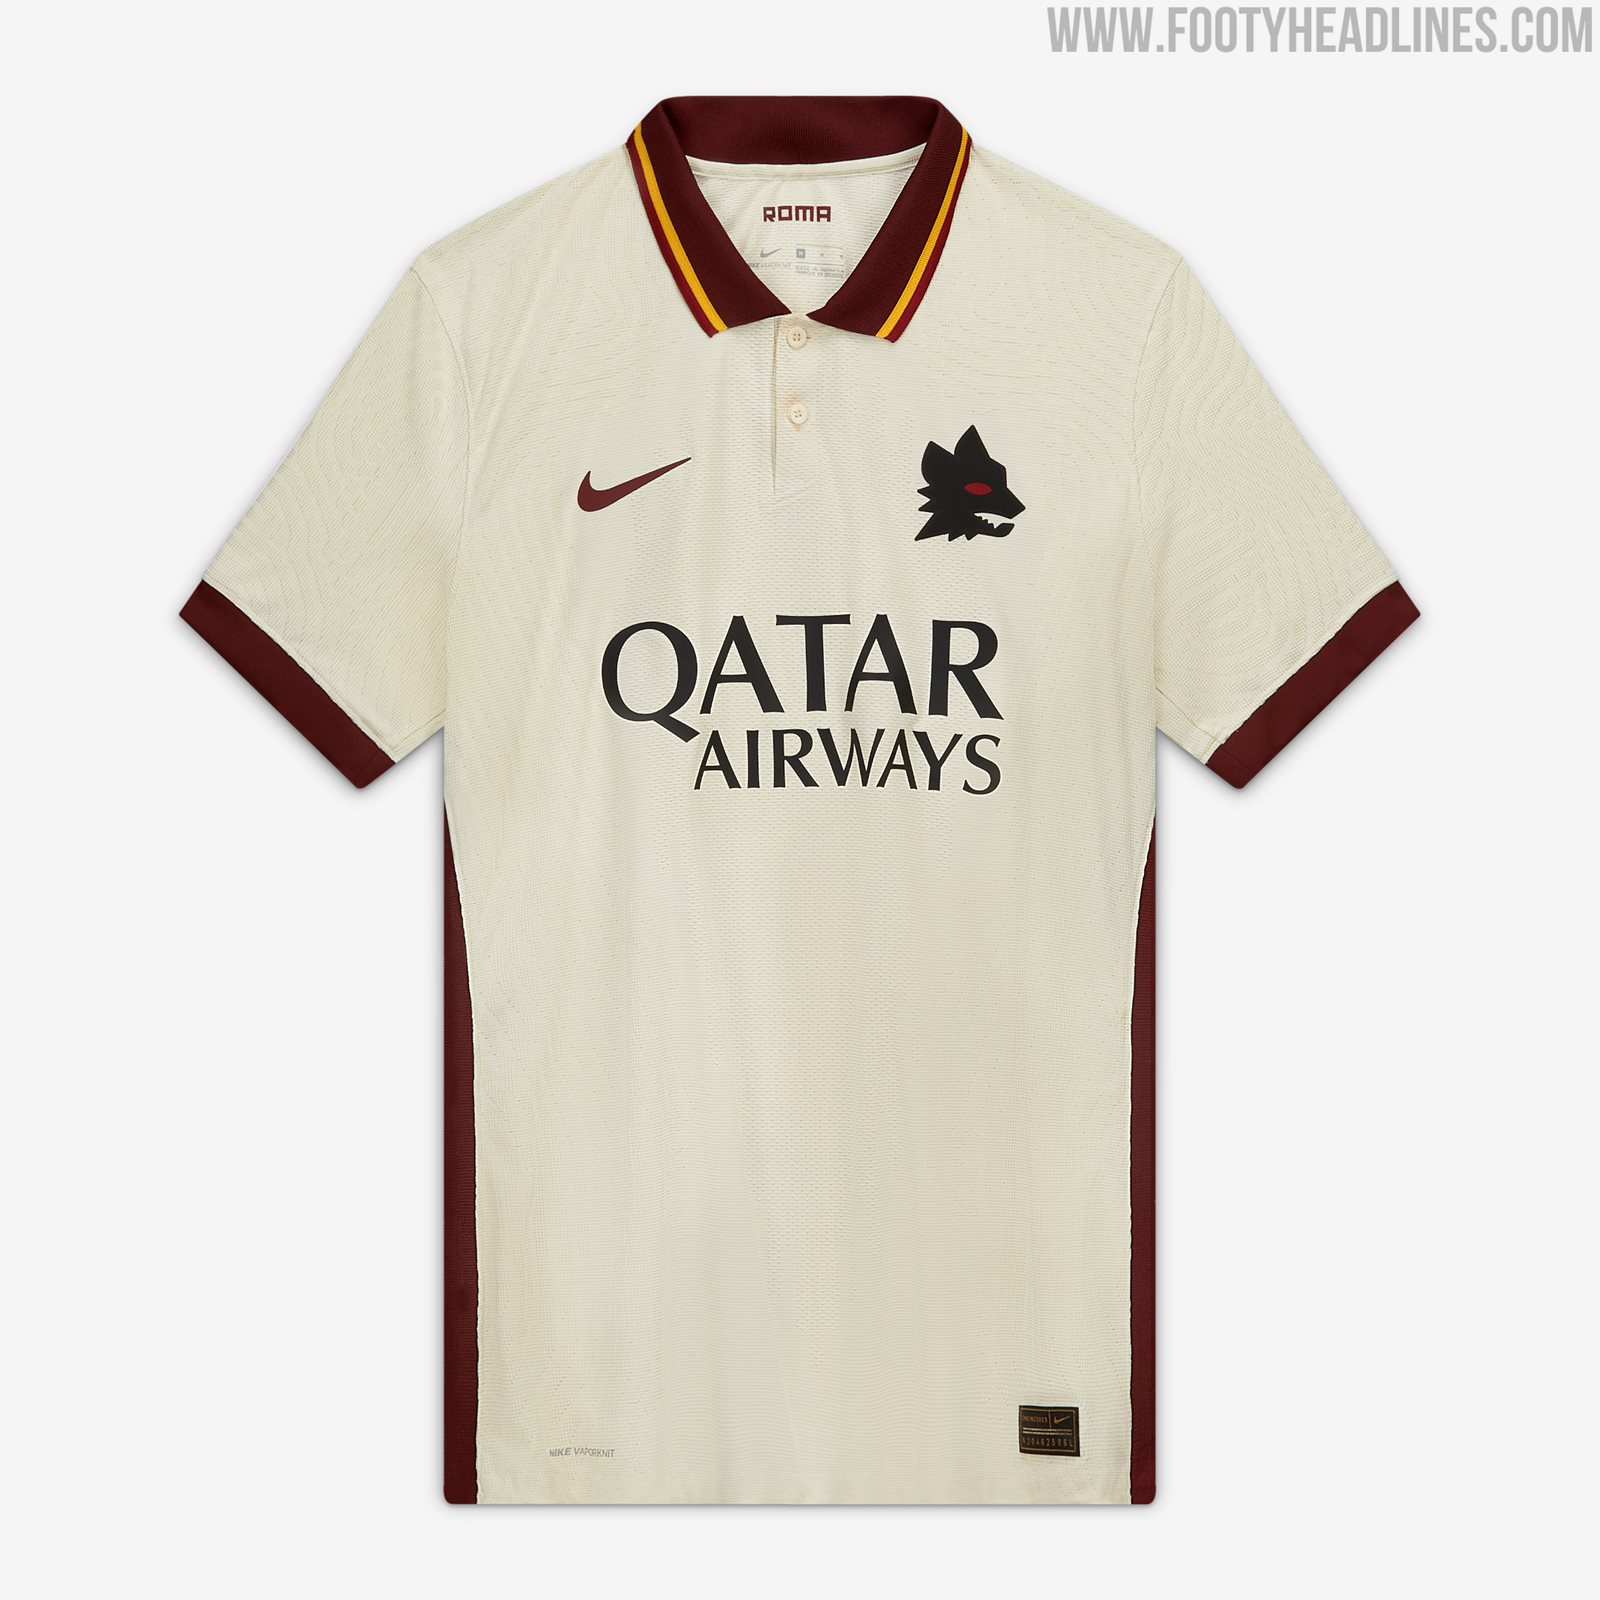 Reanimar posterior Melodramático Spectacular AS Roma 20-21 Away Kit Released - Footy Headlines